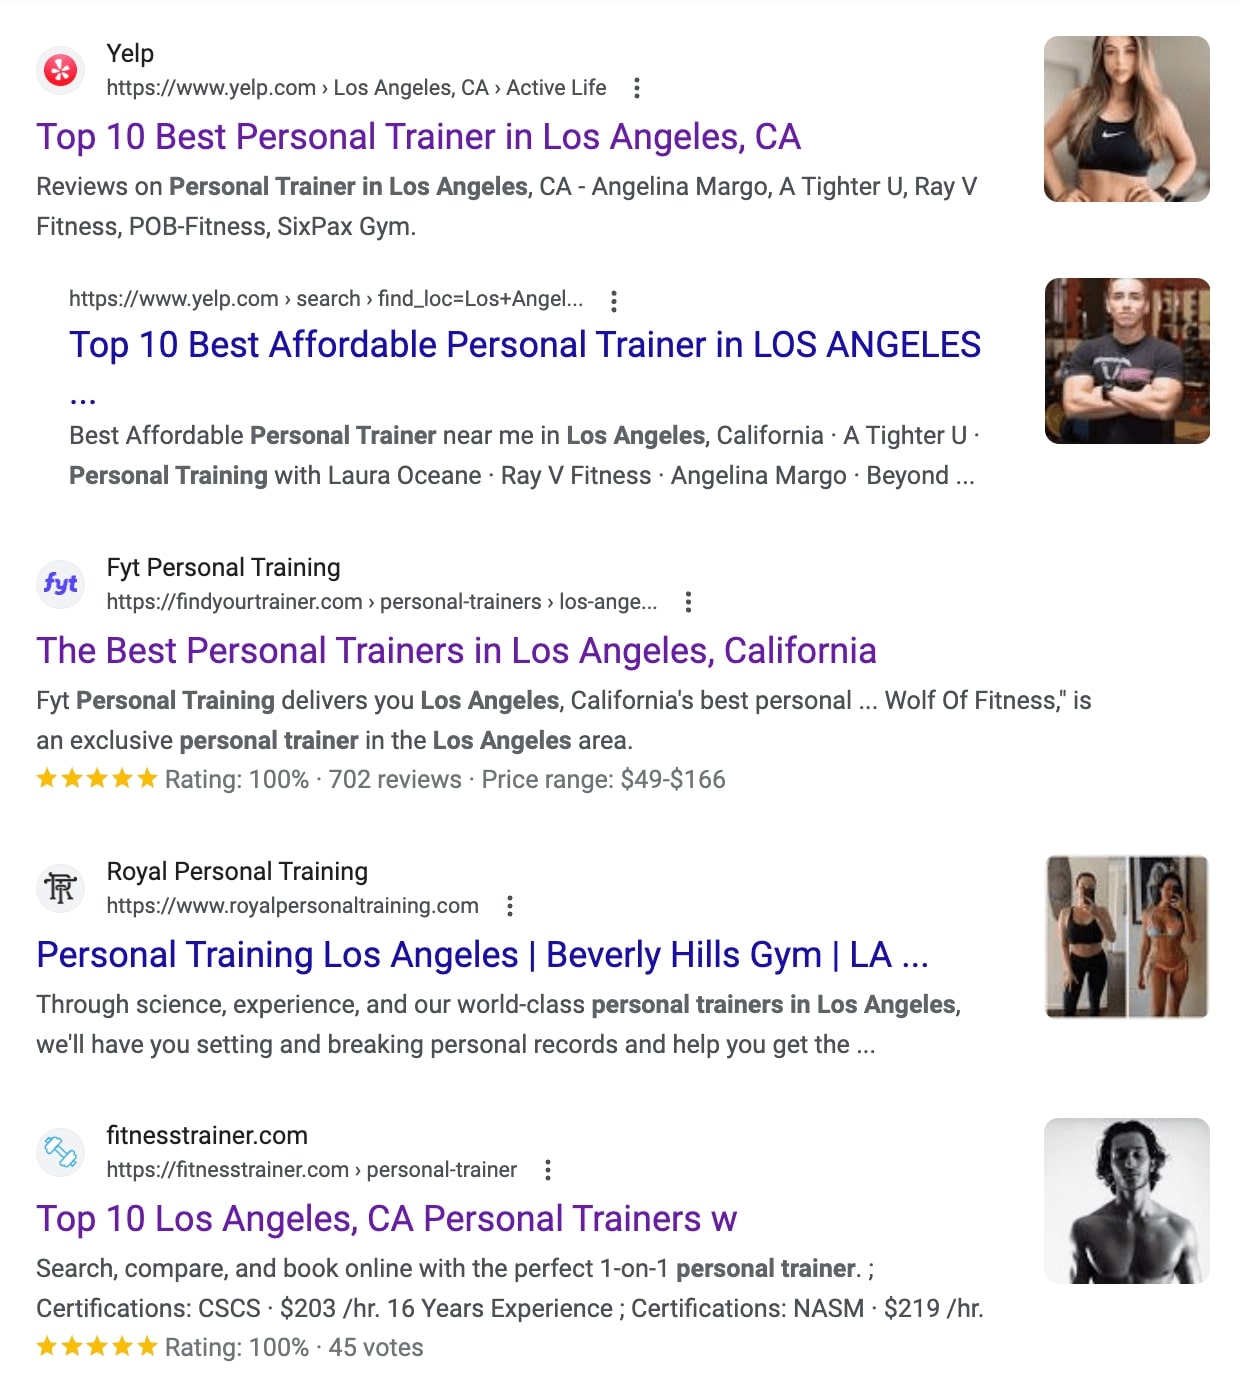 what is referral traffic? top google search results for “personal trainer in los angeles”